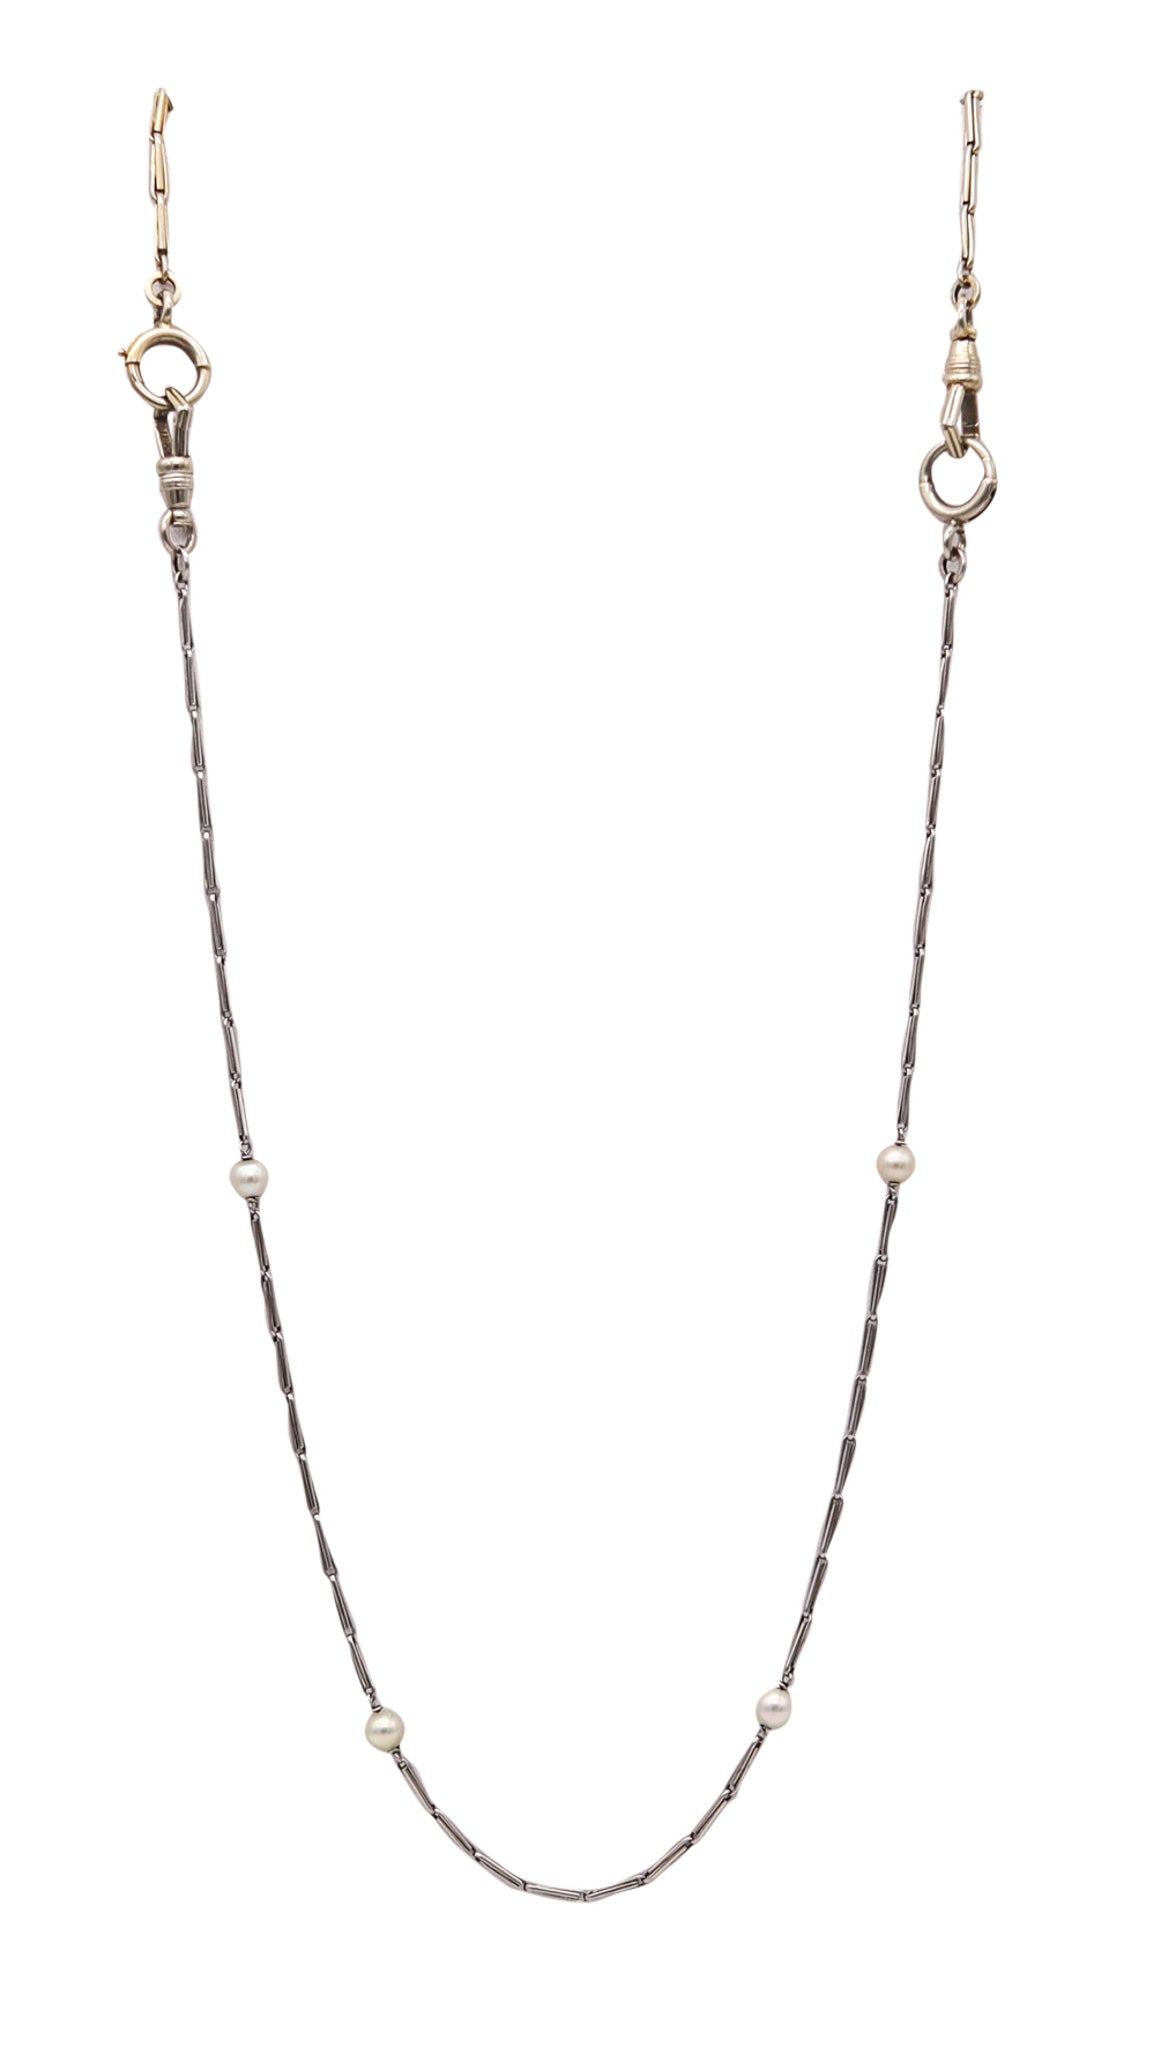 -Jacques Kreisler & Co 1920 Necklace In Platinum And 18Kt White Gold With Pearls